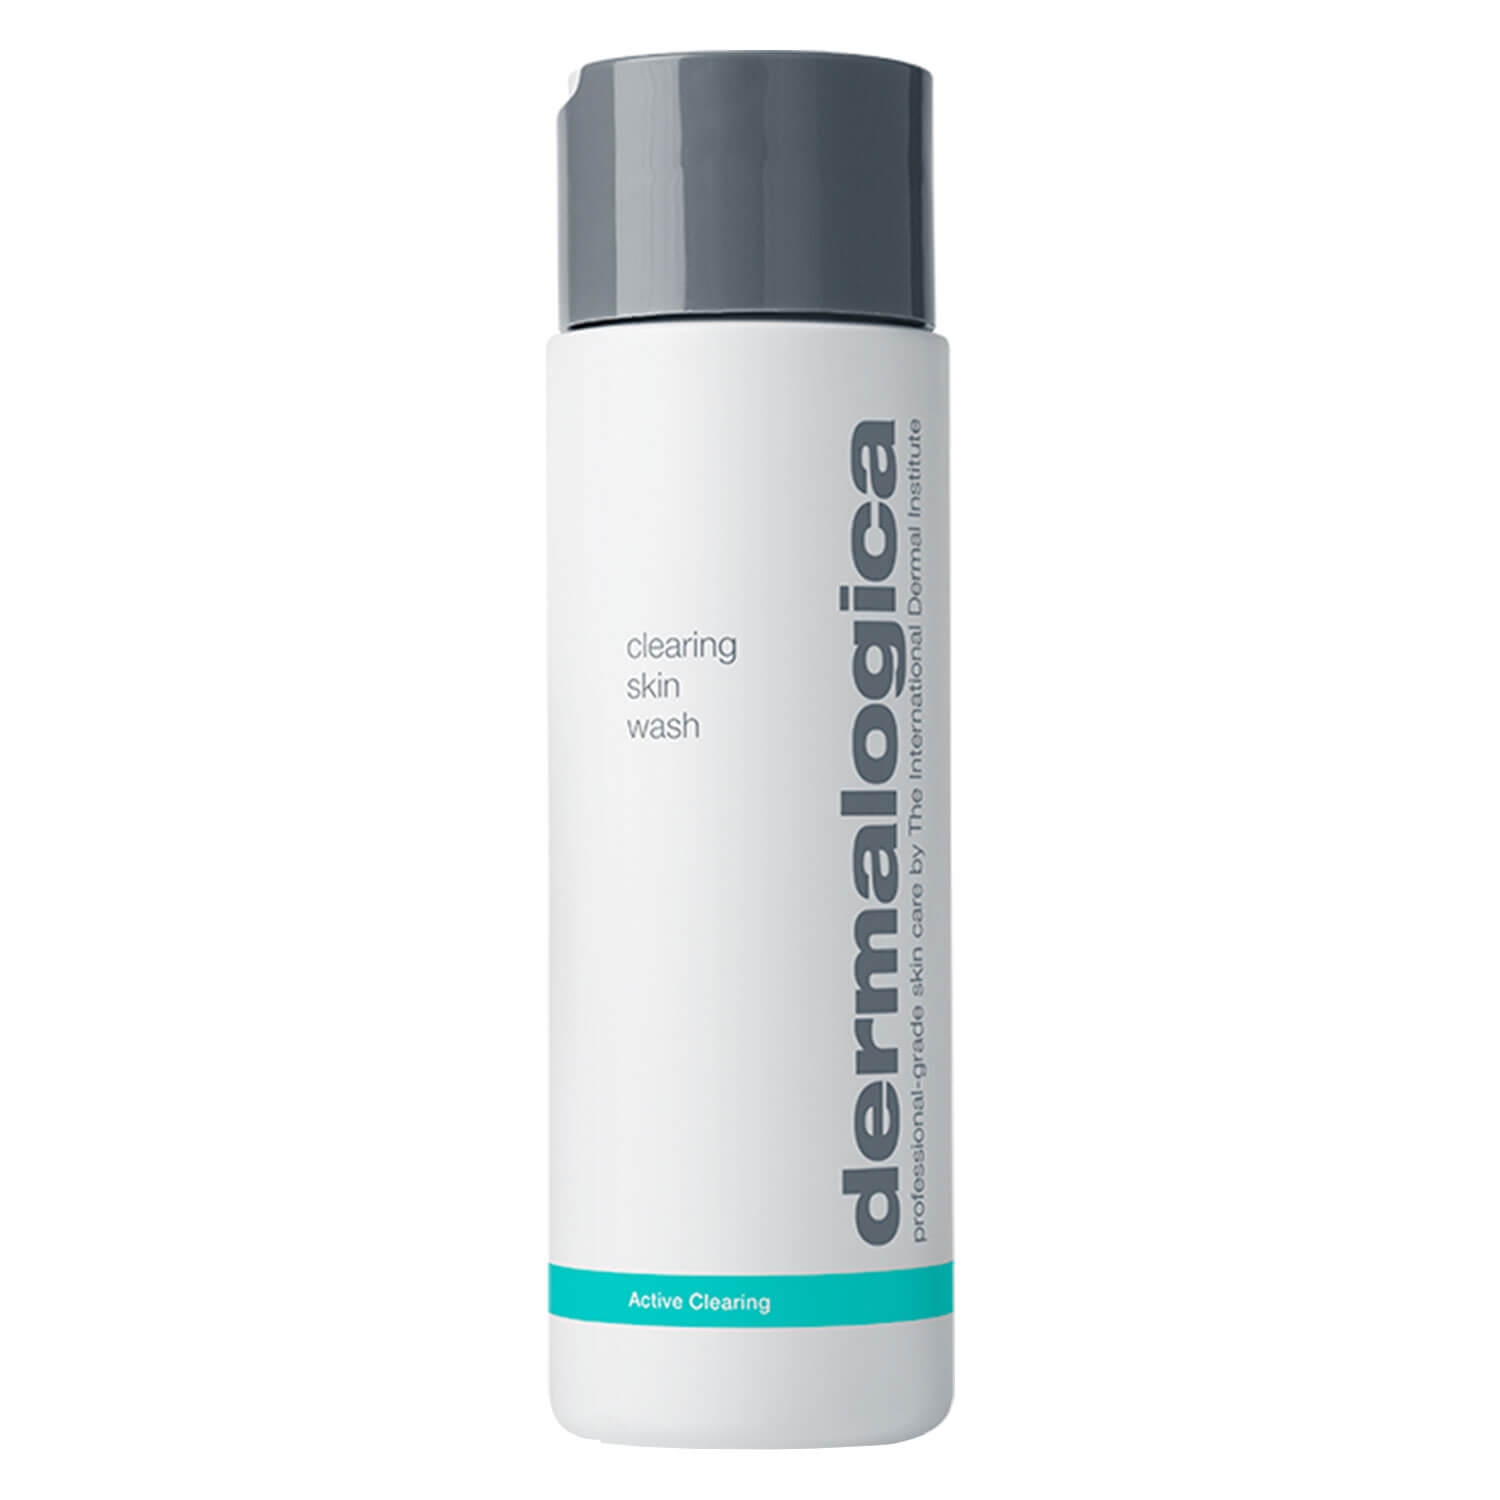 Product image from Active Clearing - Clearing Skin Wash